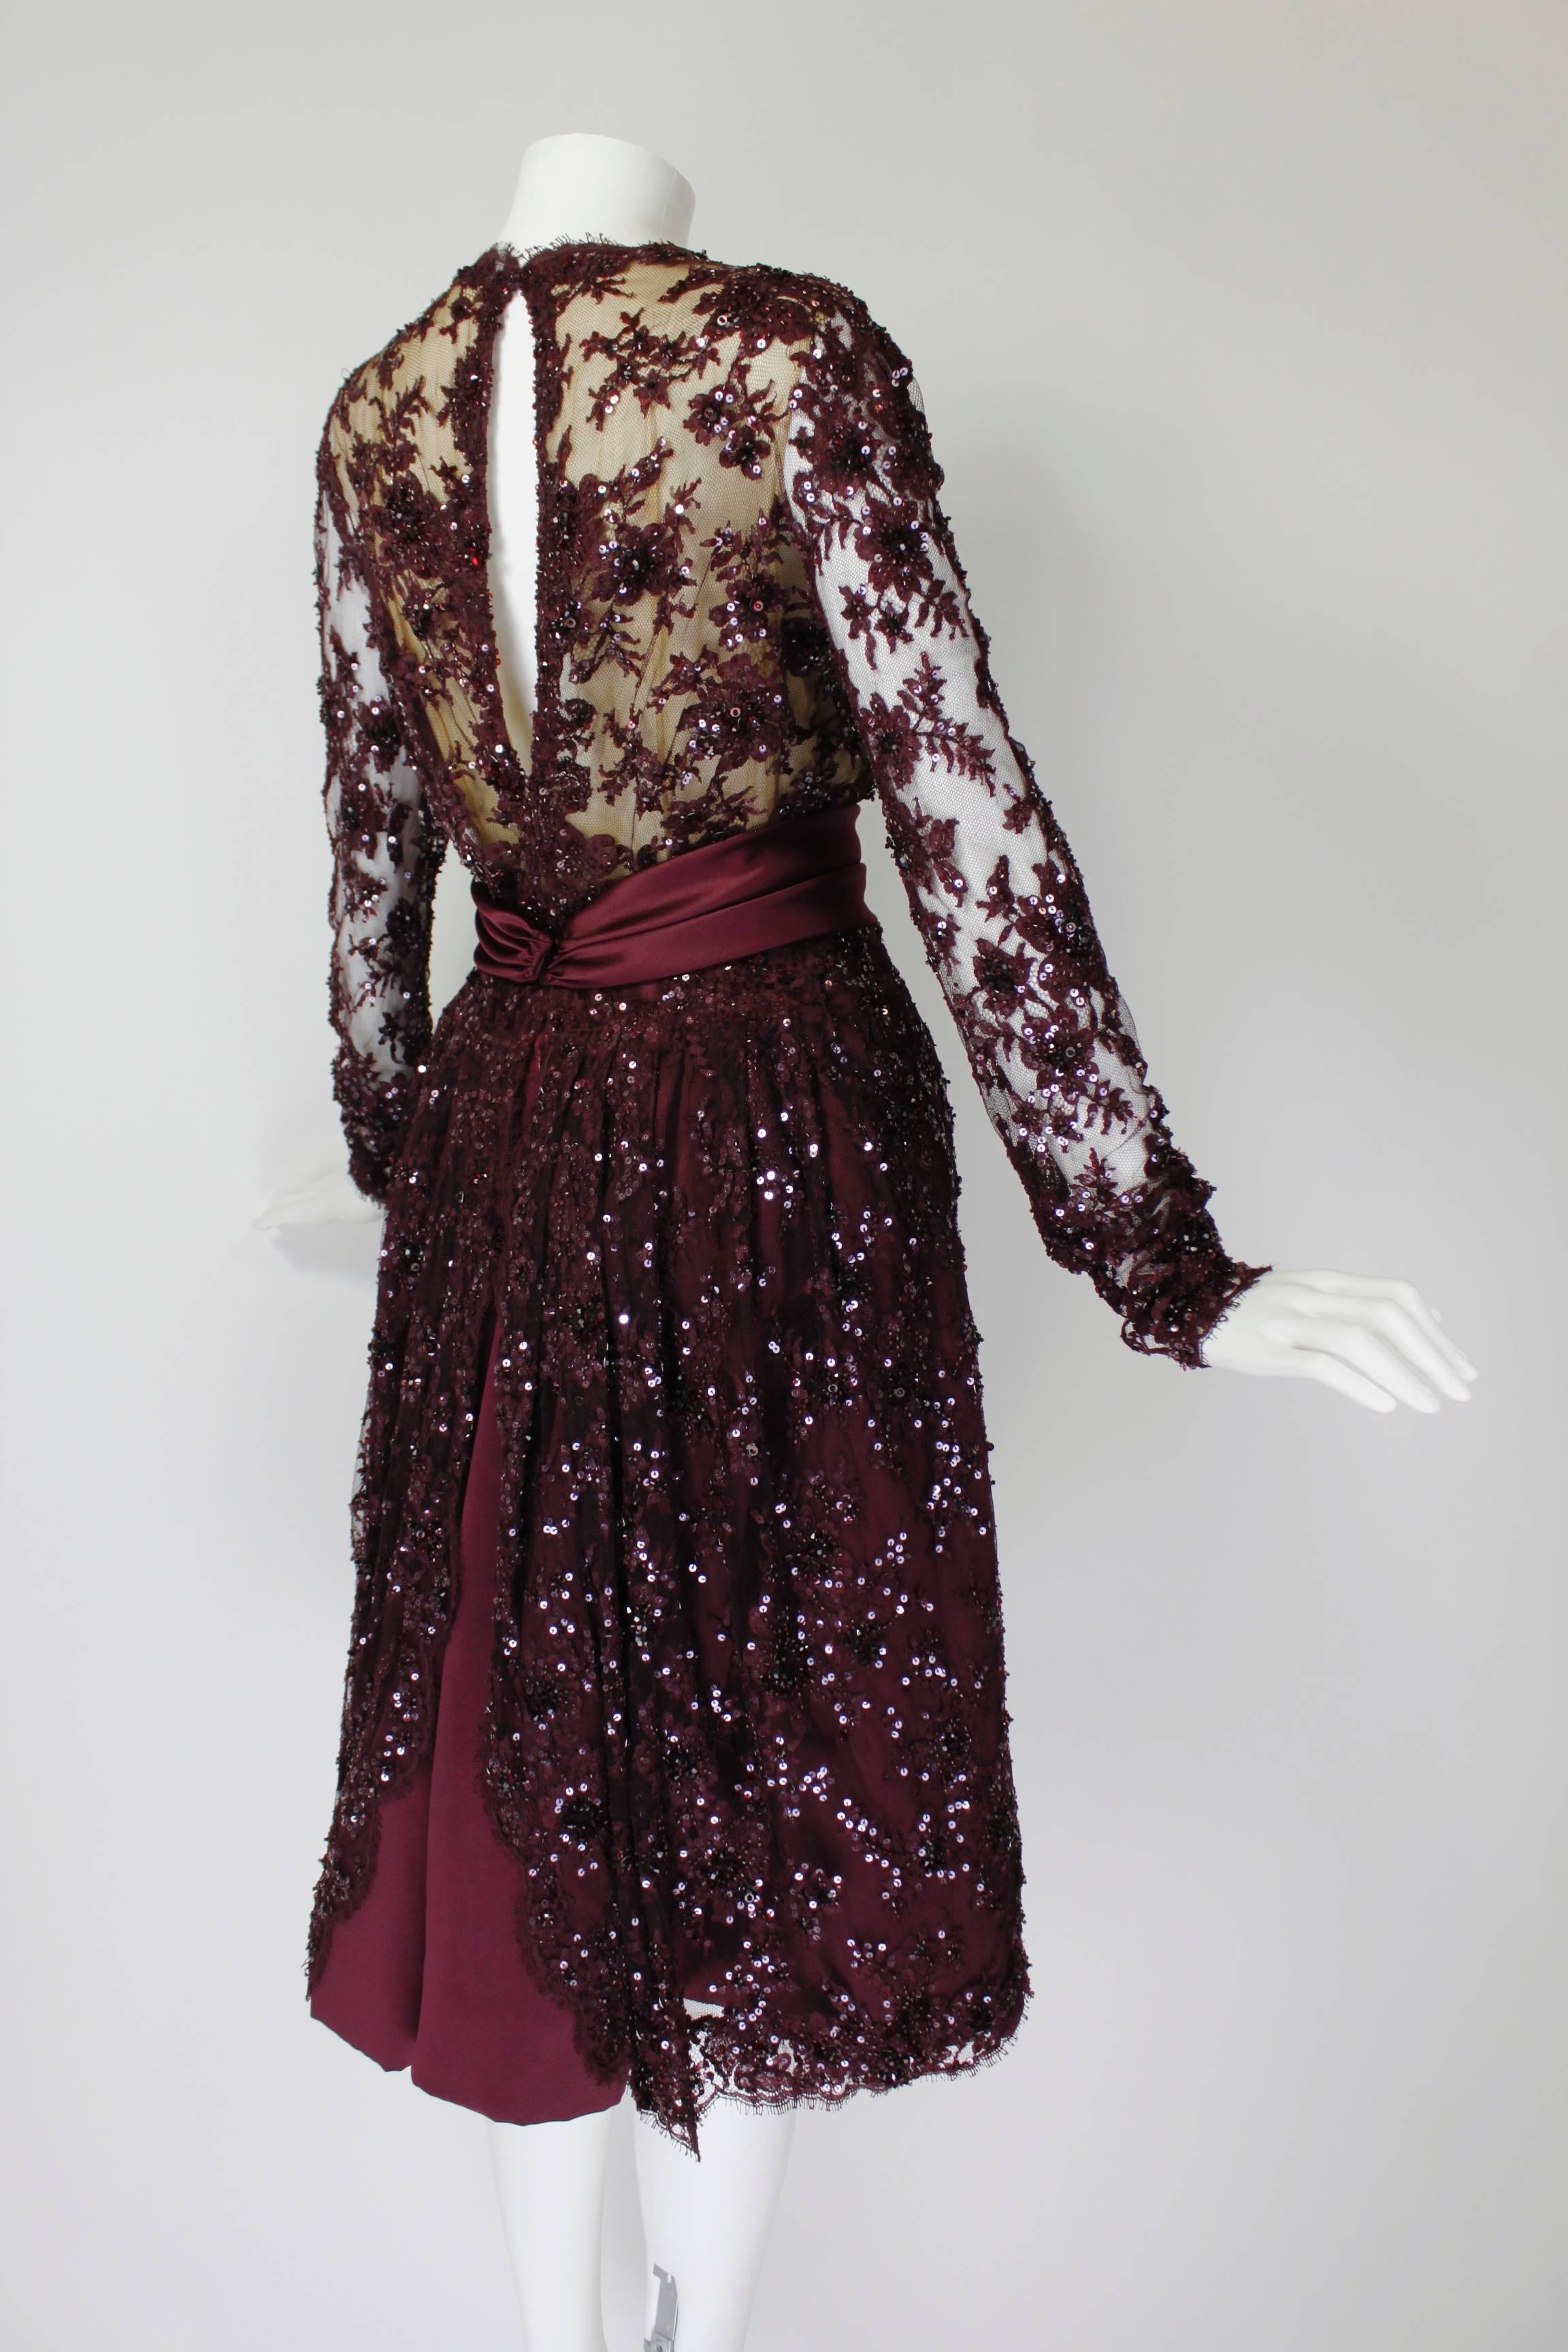 John Anthony Ruby Floral Lace Cocktail Dress with Rhinestone Details In Excellent Condition For Sale In Los Angeles, CA